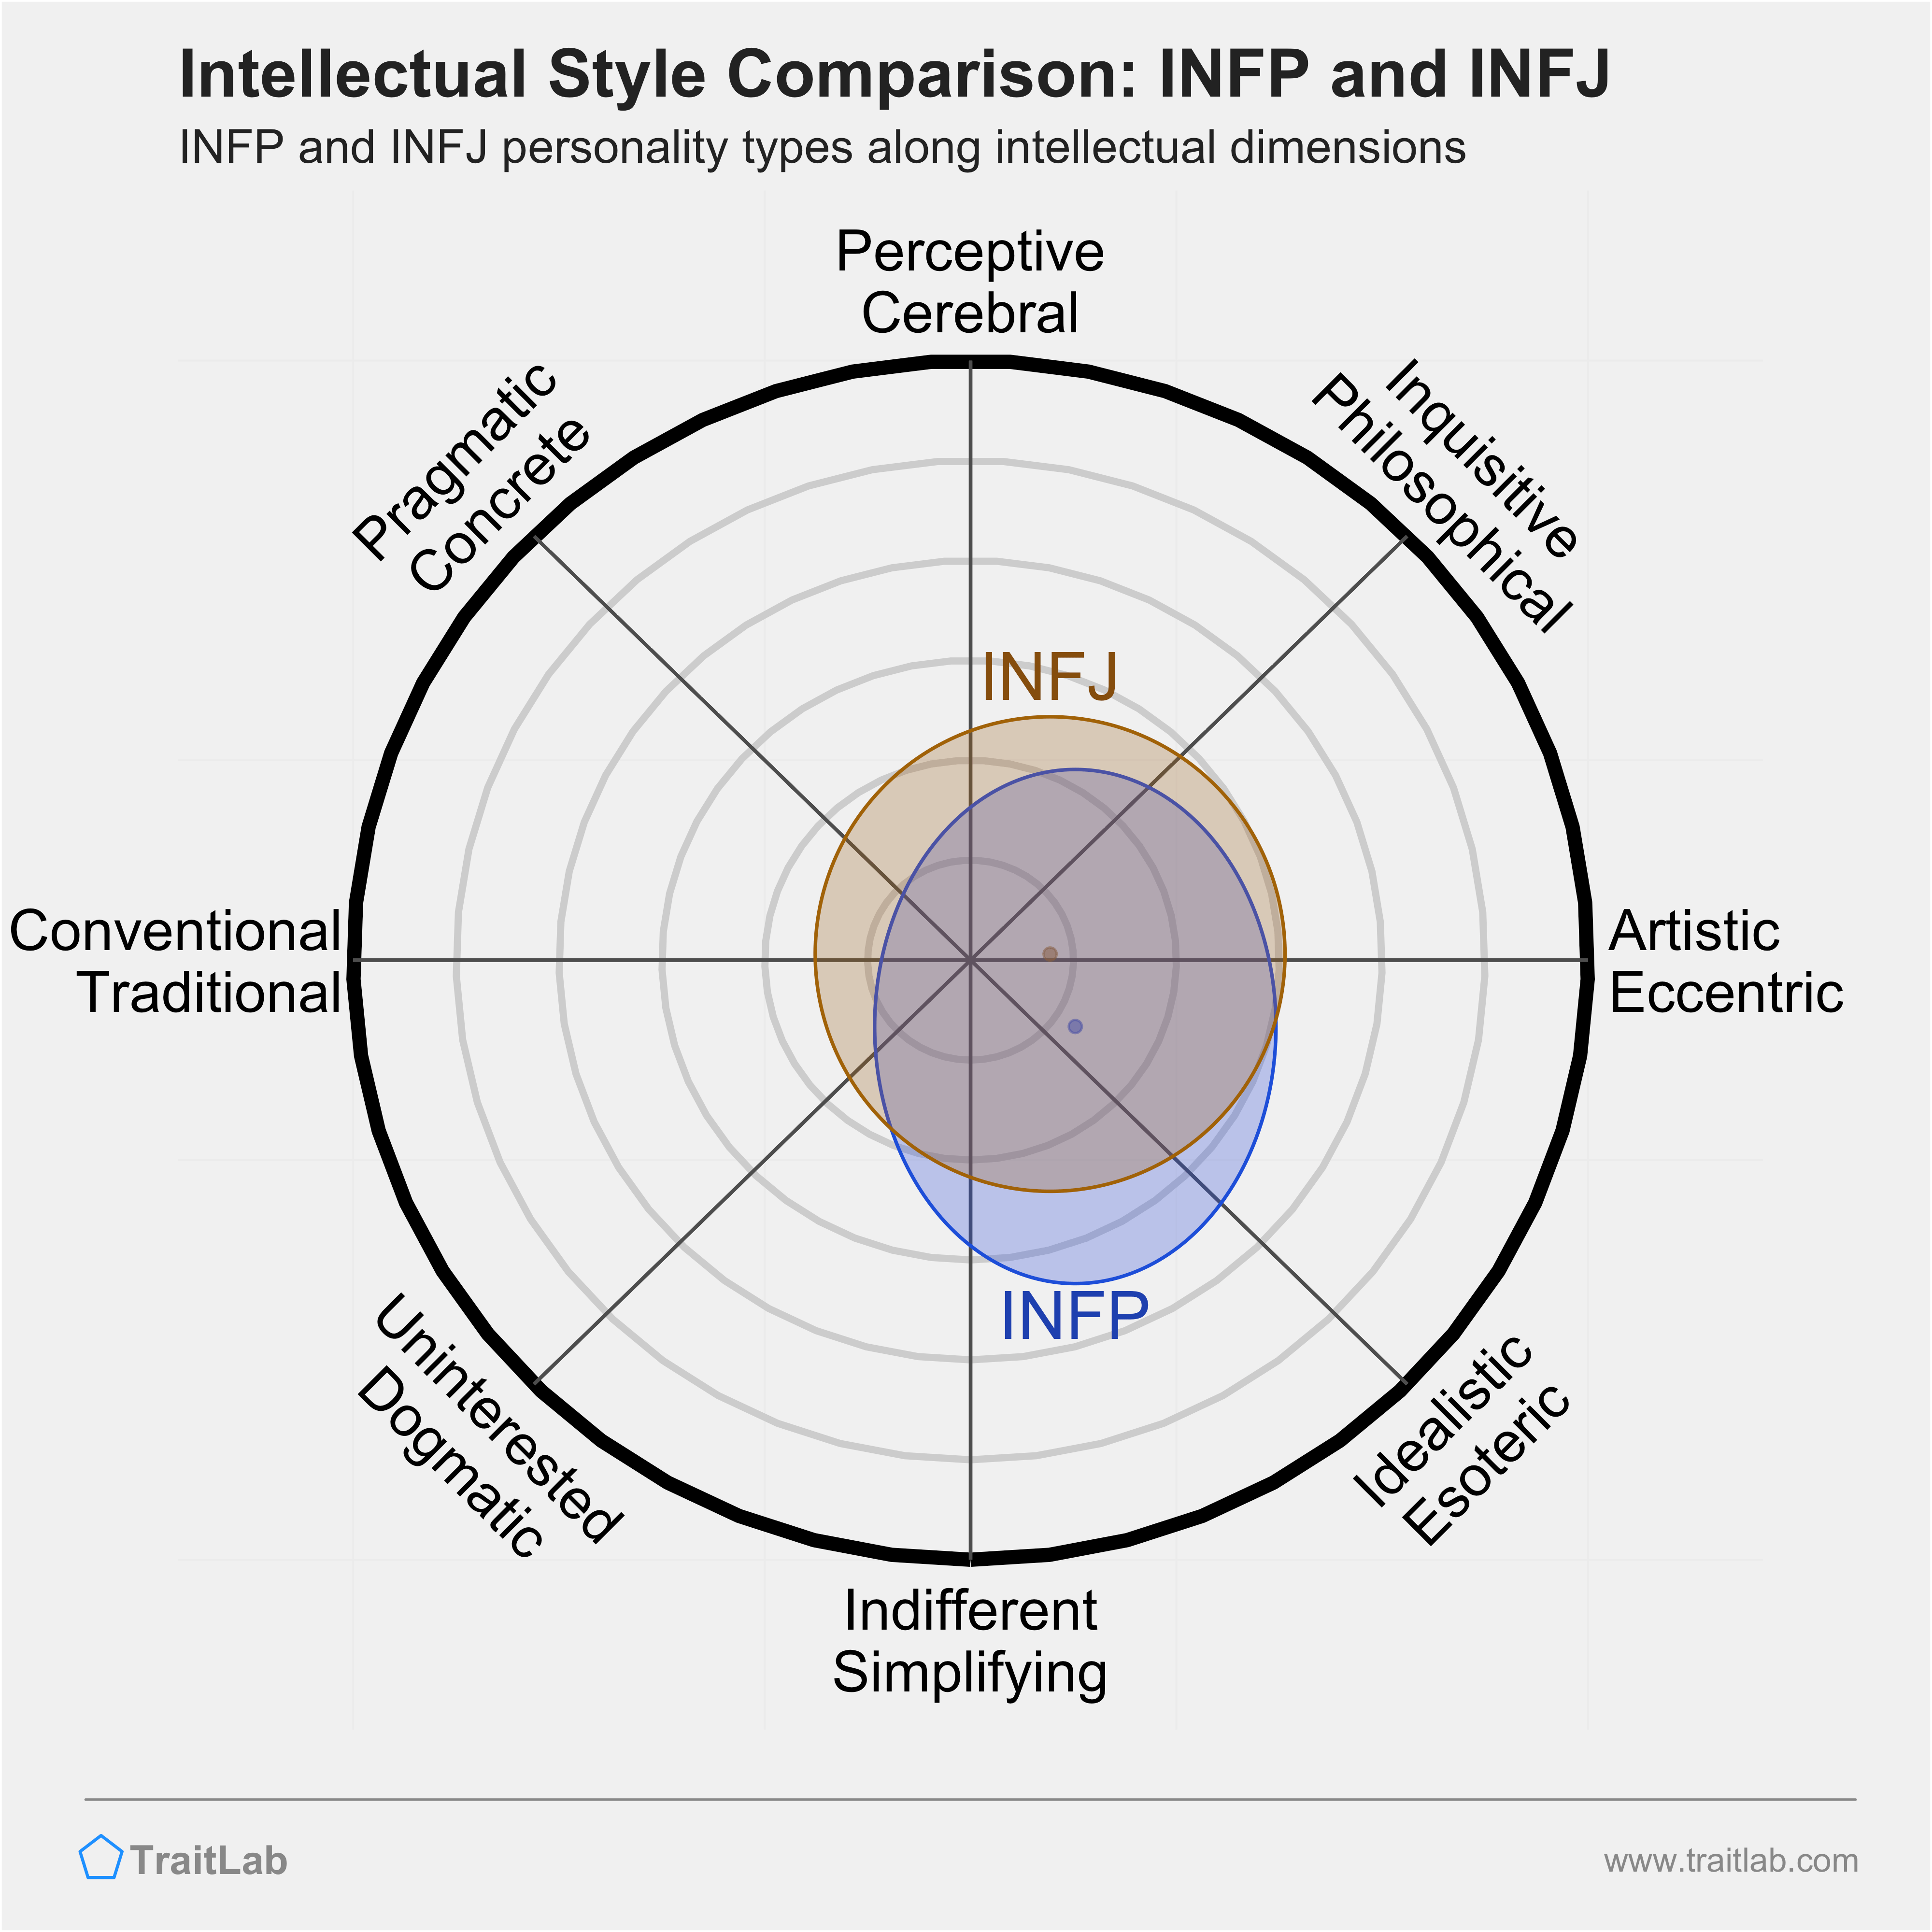 INFP and INFJ comparison across intellectual dimensions